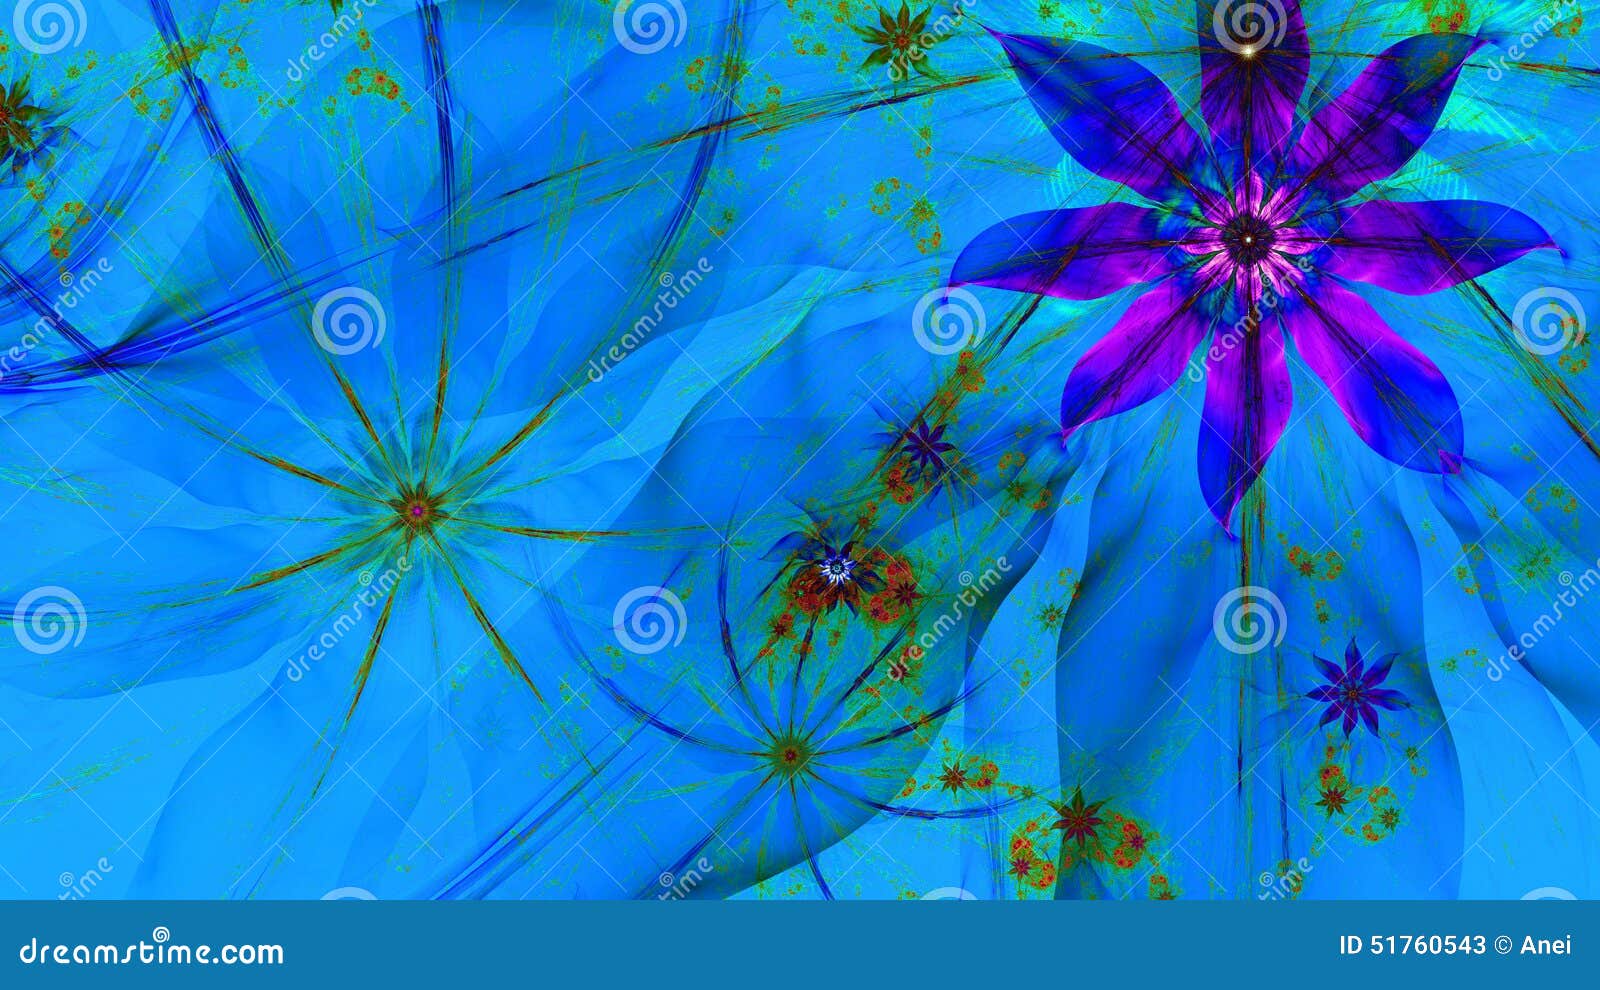 beautiful vivid glowing modern flower background in green,pink,red,blue colors